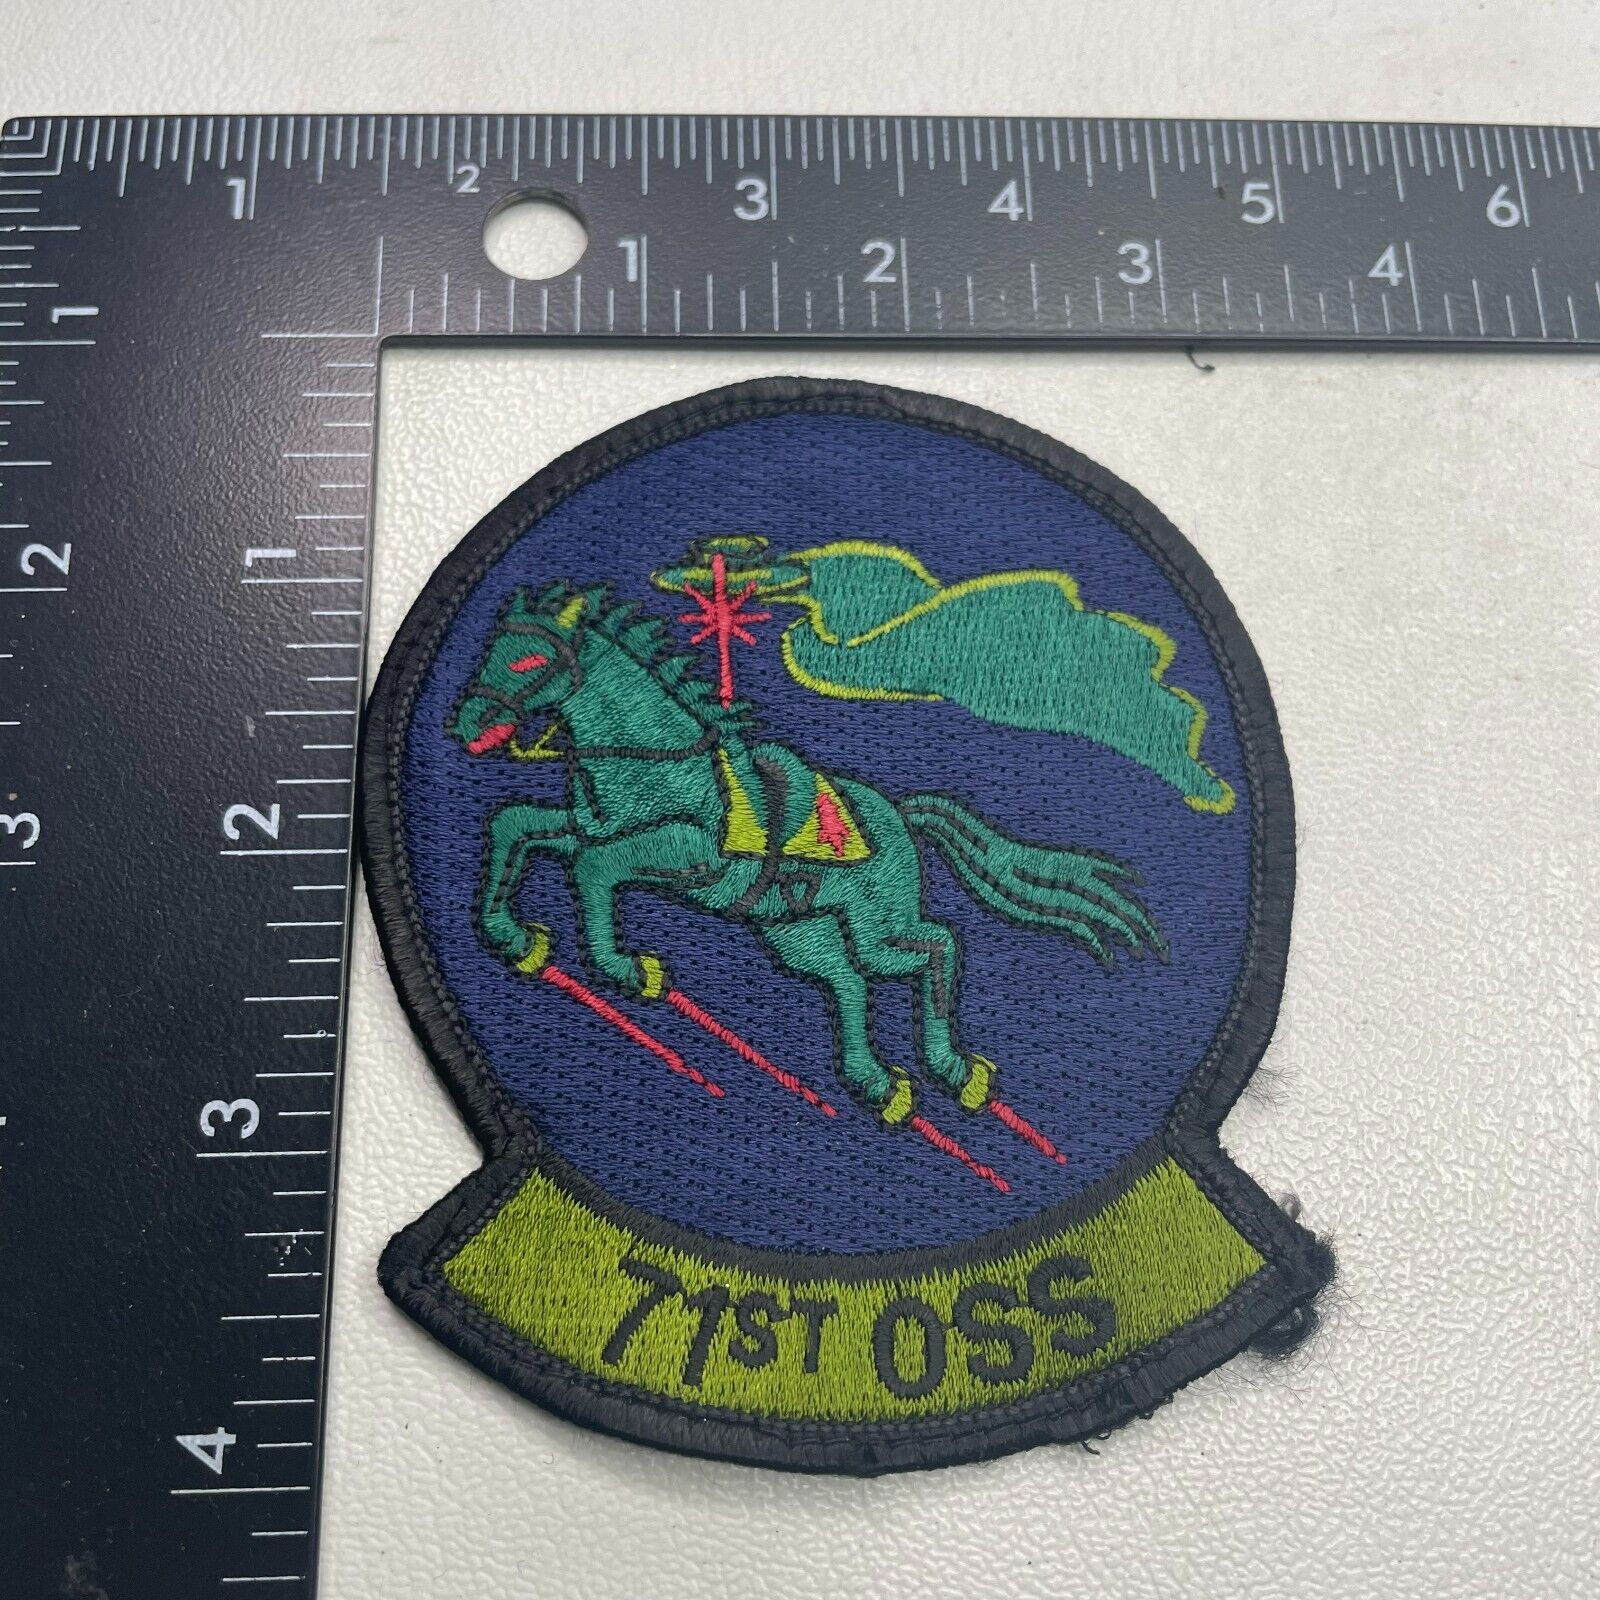 United States Air Force 71ST OSS OPERATION SUPPORT SQUADRON Patch 27RH